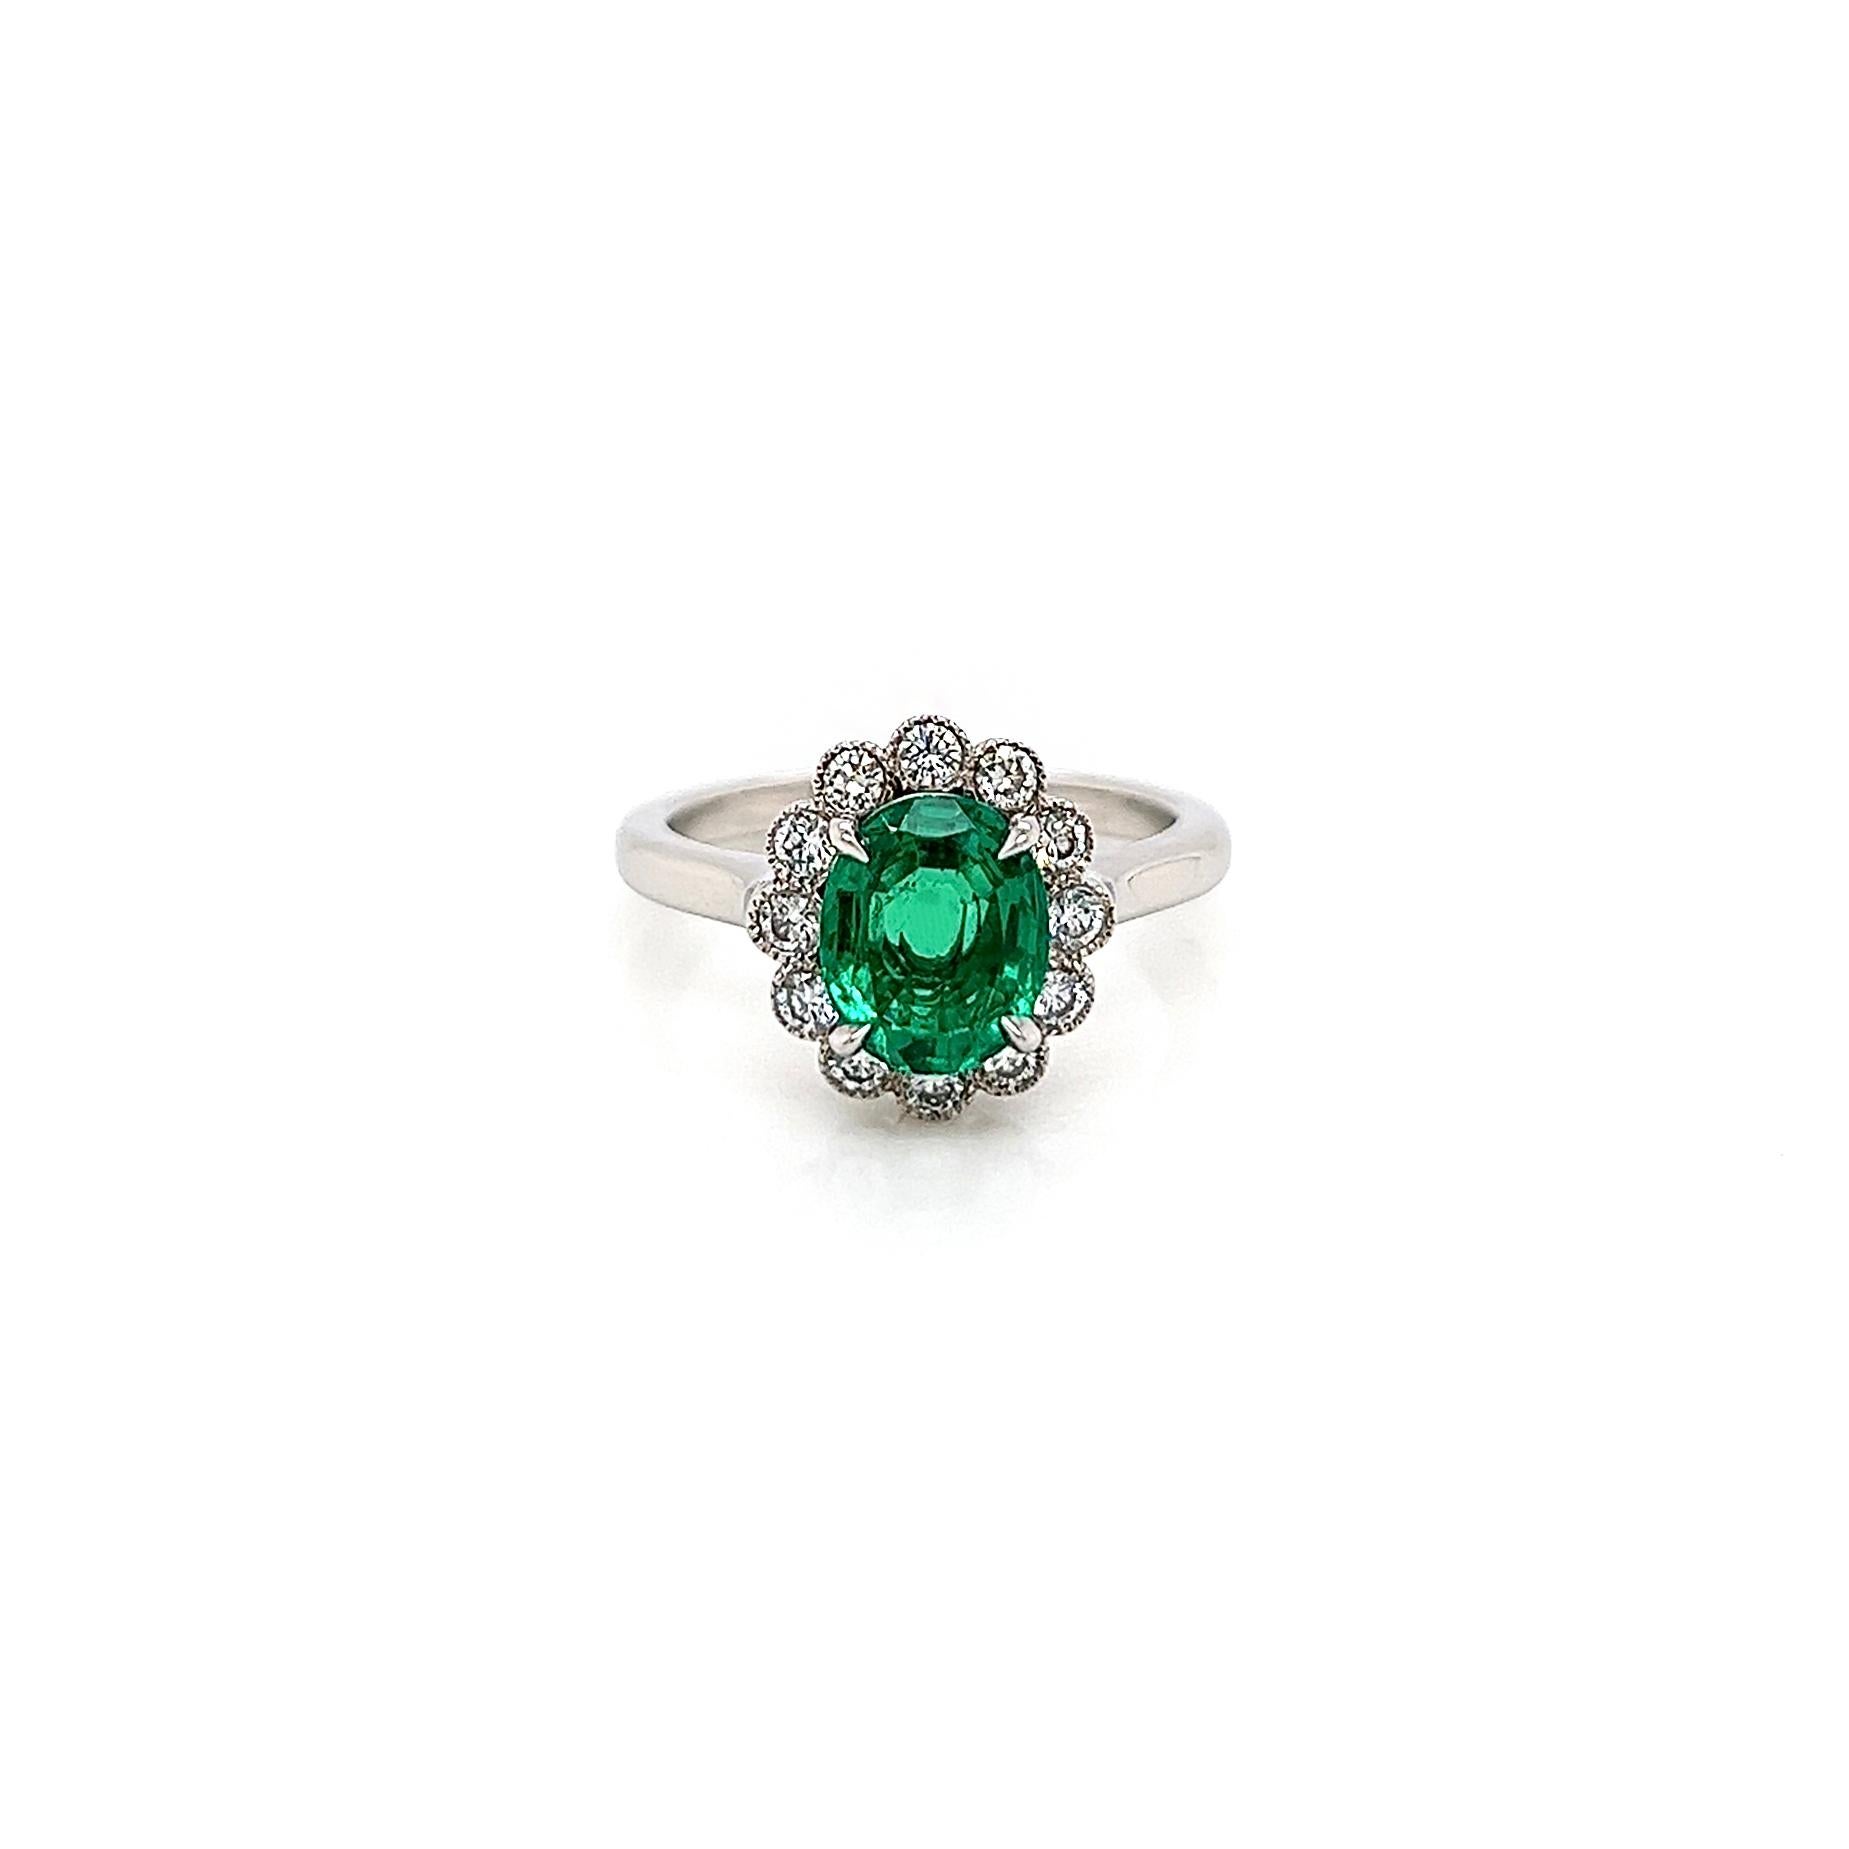 1.66 Total Carat Green Emerald and Diamond Ladies Ring, GIA

-Metal Type: Platinum
-1.33 Carat Oval Columbian Green Emerald, GIA Certified
-0.33 Carat Round Natural Diamonds, E-F Color, VS-SI Clarity
-Size 6.0

Made in New York City.